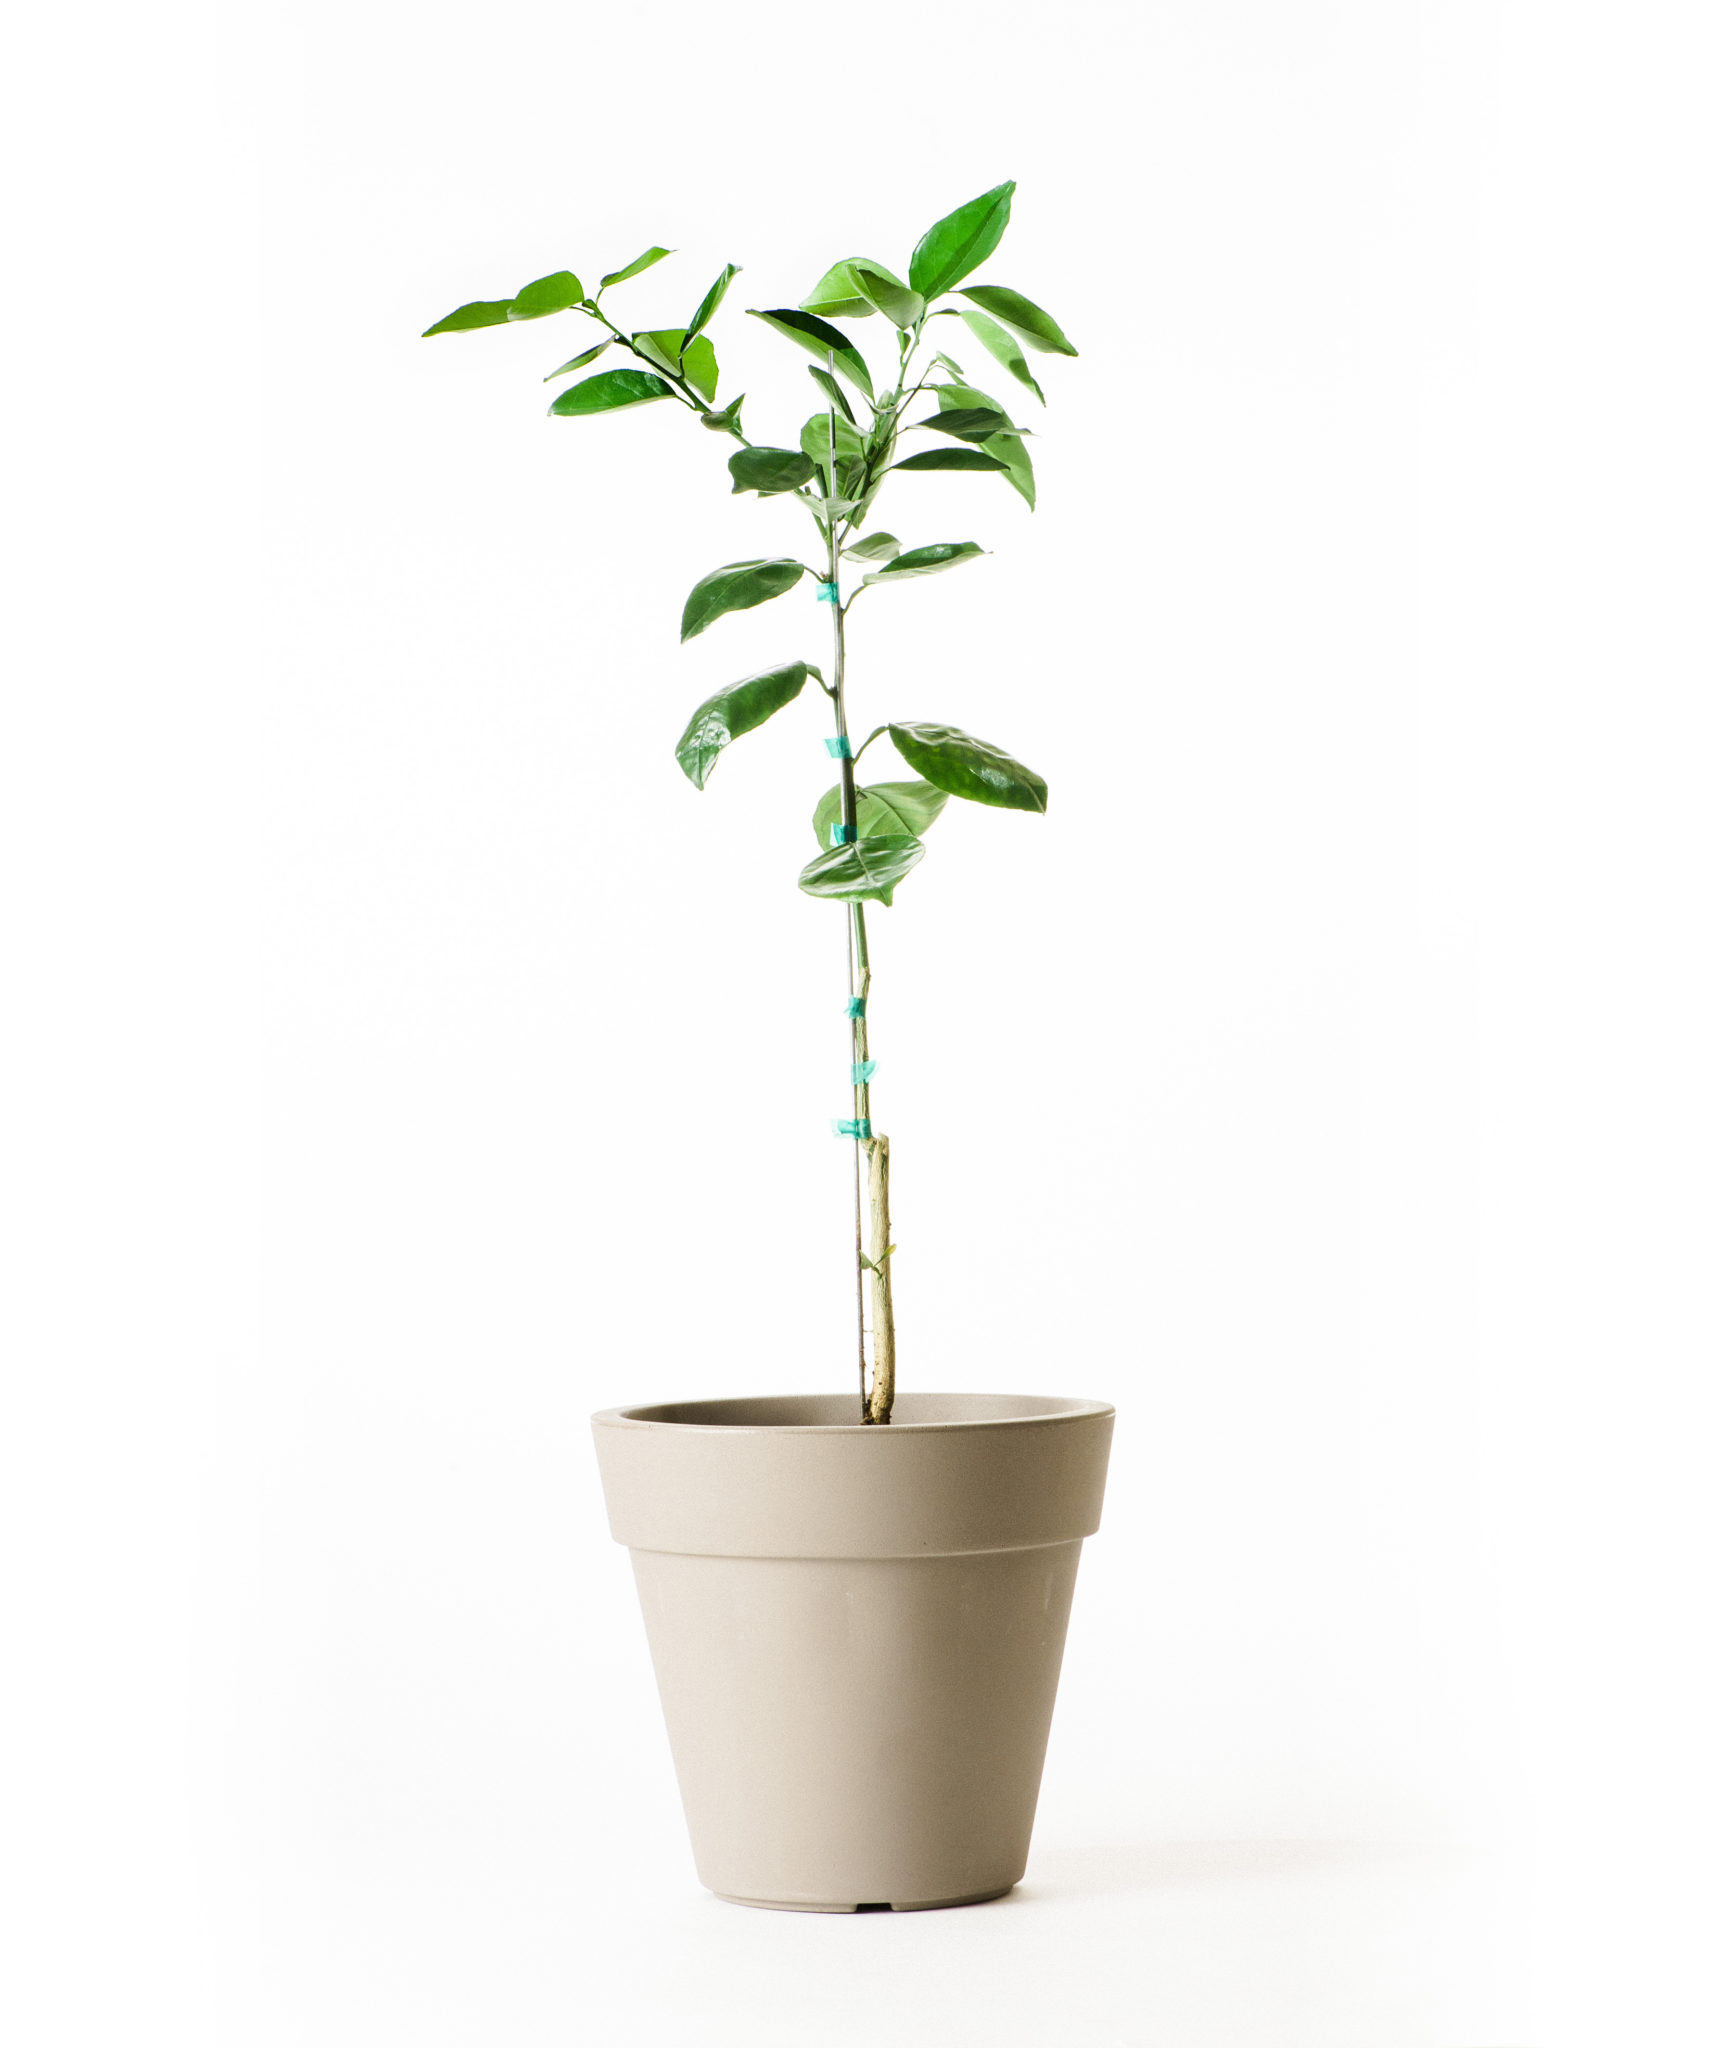 Image of Moro Blood Orange Tree (Age: 2 - 3 Years Height: 2 - 3 FT Ship Method: Delivery)